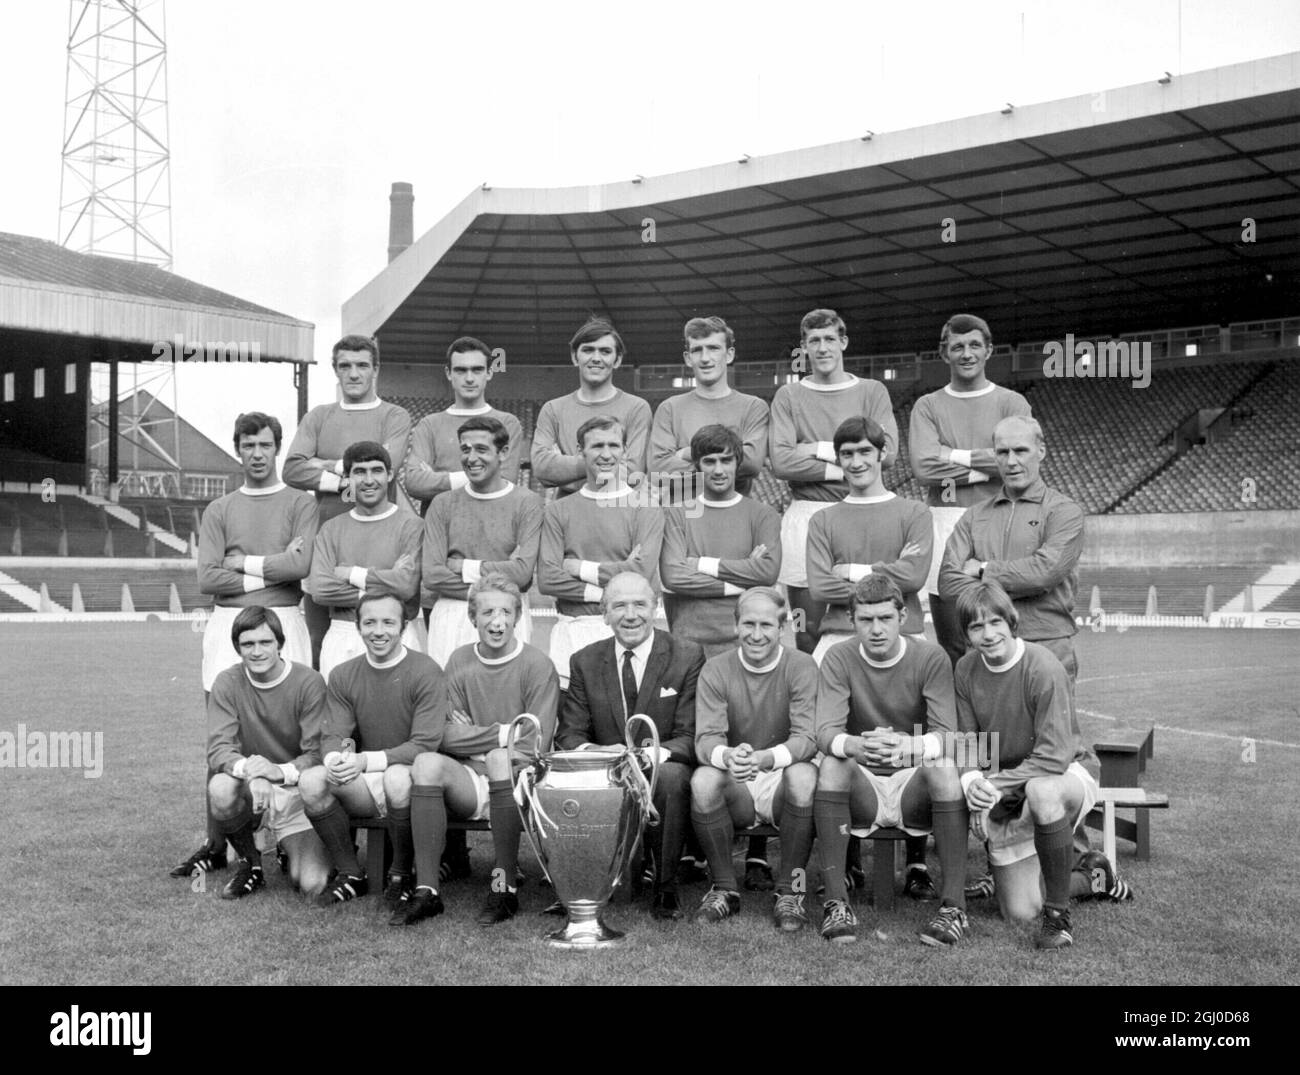 The Manchester United Football team of July 26th 1968, seen here with the European Cup that they won after beating Benfica. Back Row L to R,B.Foulkes, J Aston, J. Rimmer, A. Stepney, A. Gowling, D. Head. Centre, D. Sadler, T. Dunne, S. Brennan, P.Crerand, G. Best and F. Burns and trainer J. Crompton. Front, J.Ryan, N. Stiles, D. Law, M. Busby. B. Charlton, B. Kidd and J. Fitzpatrick. Stock Photo